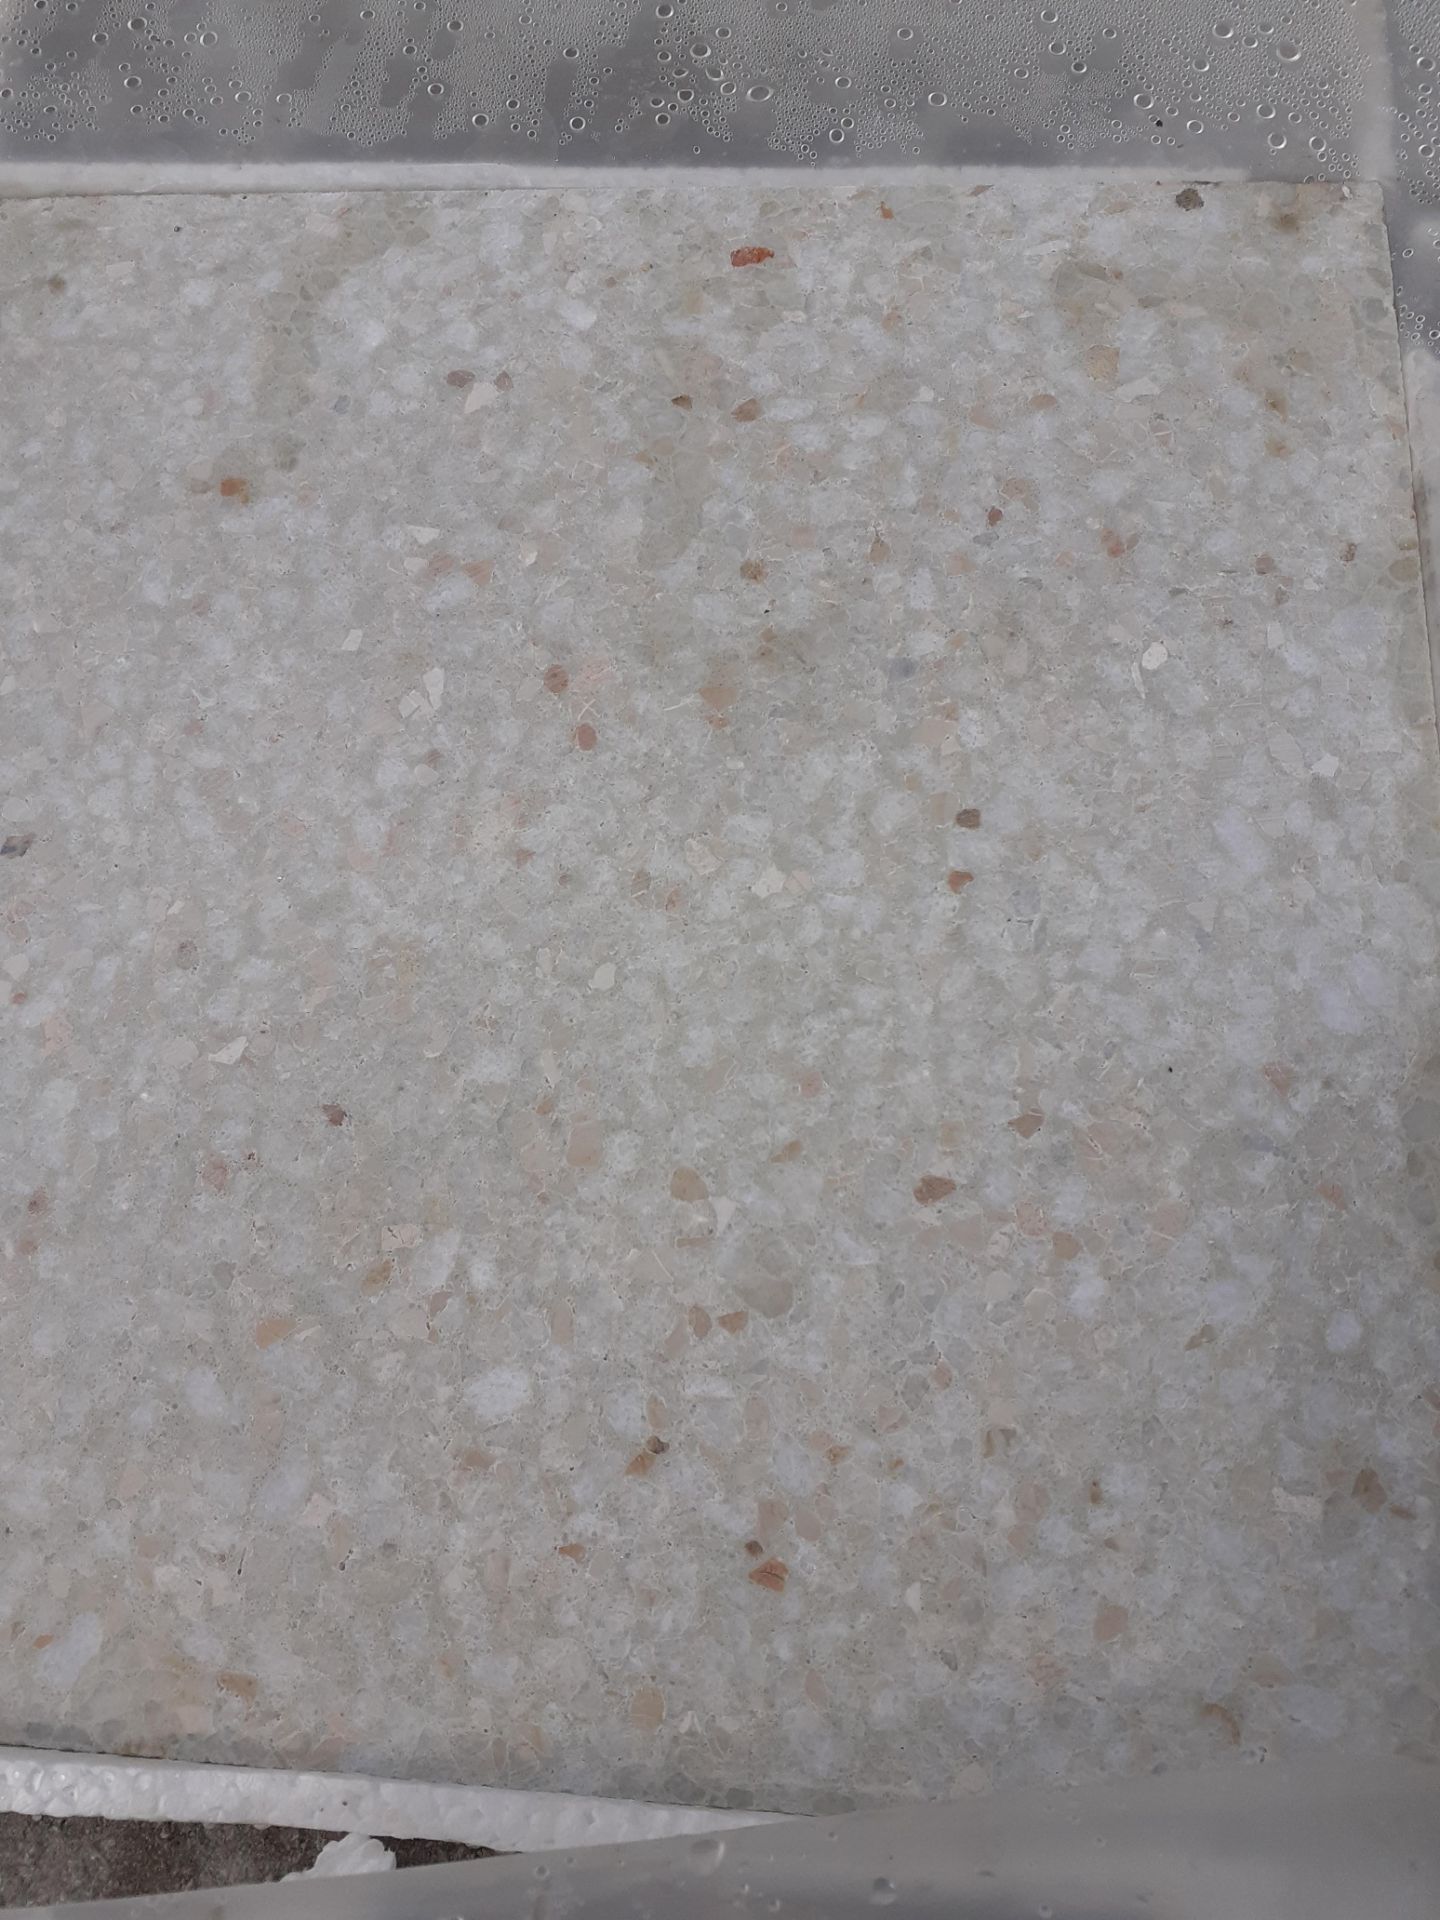 1 PALLET OF BRAND NEW TERRAZZO COMMERCIAL FLOOR TILES (Z30011), COVERS 24 SQUARE YARDS *PLUS VAT* - Image 5 of 6